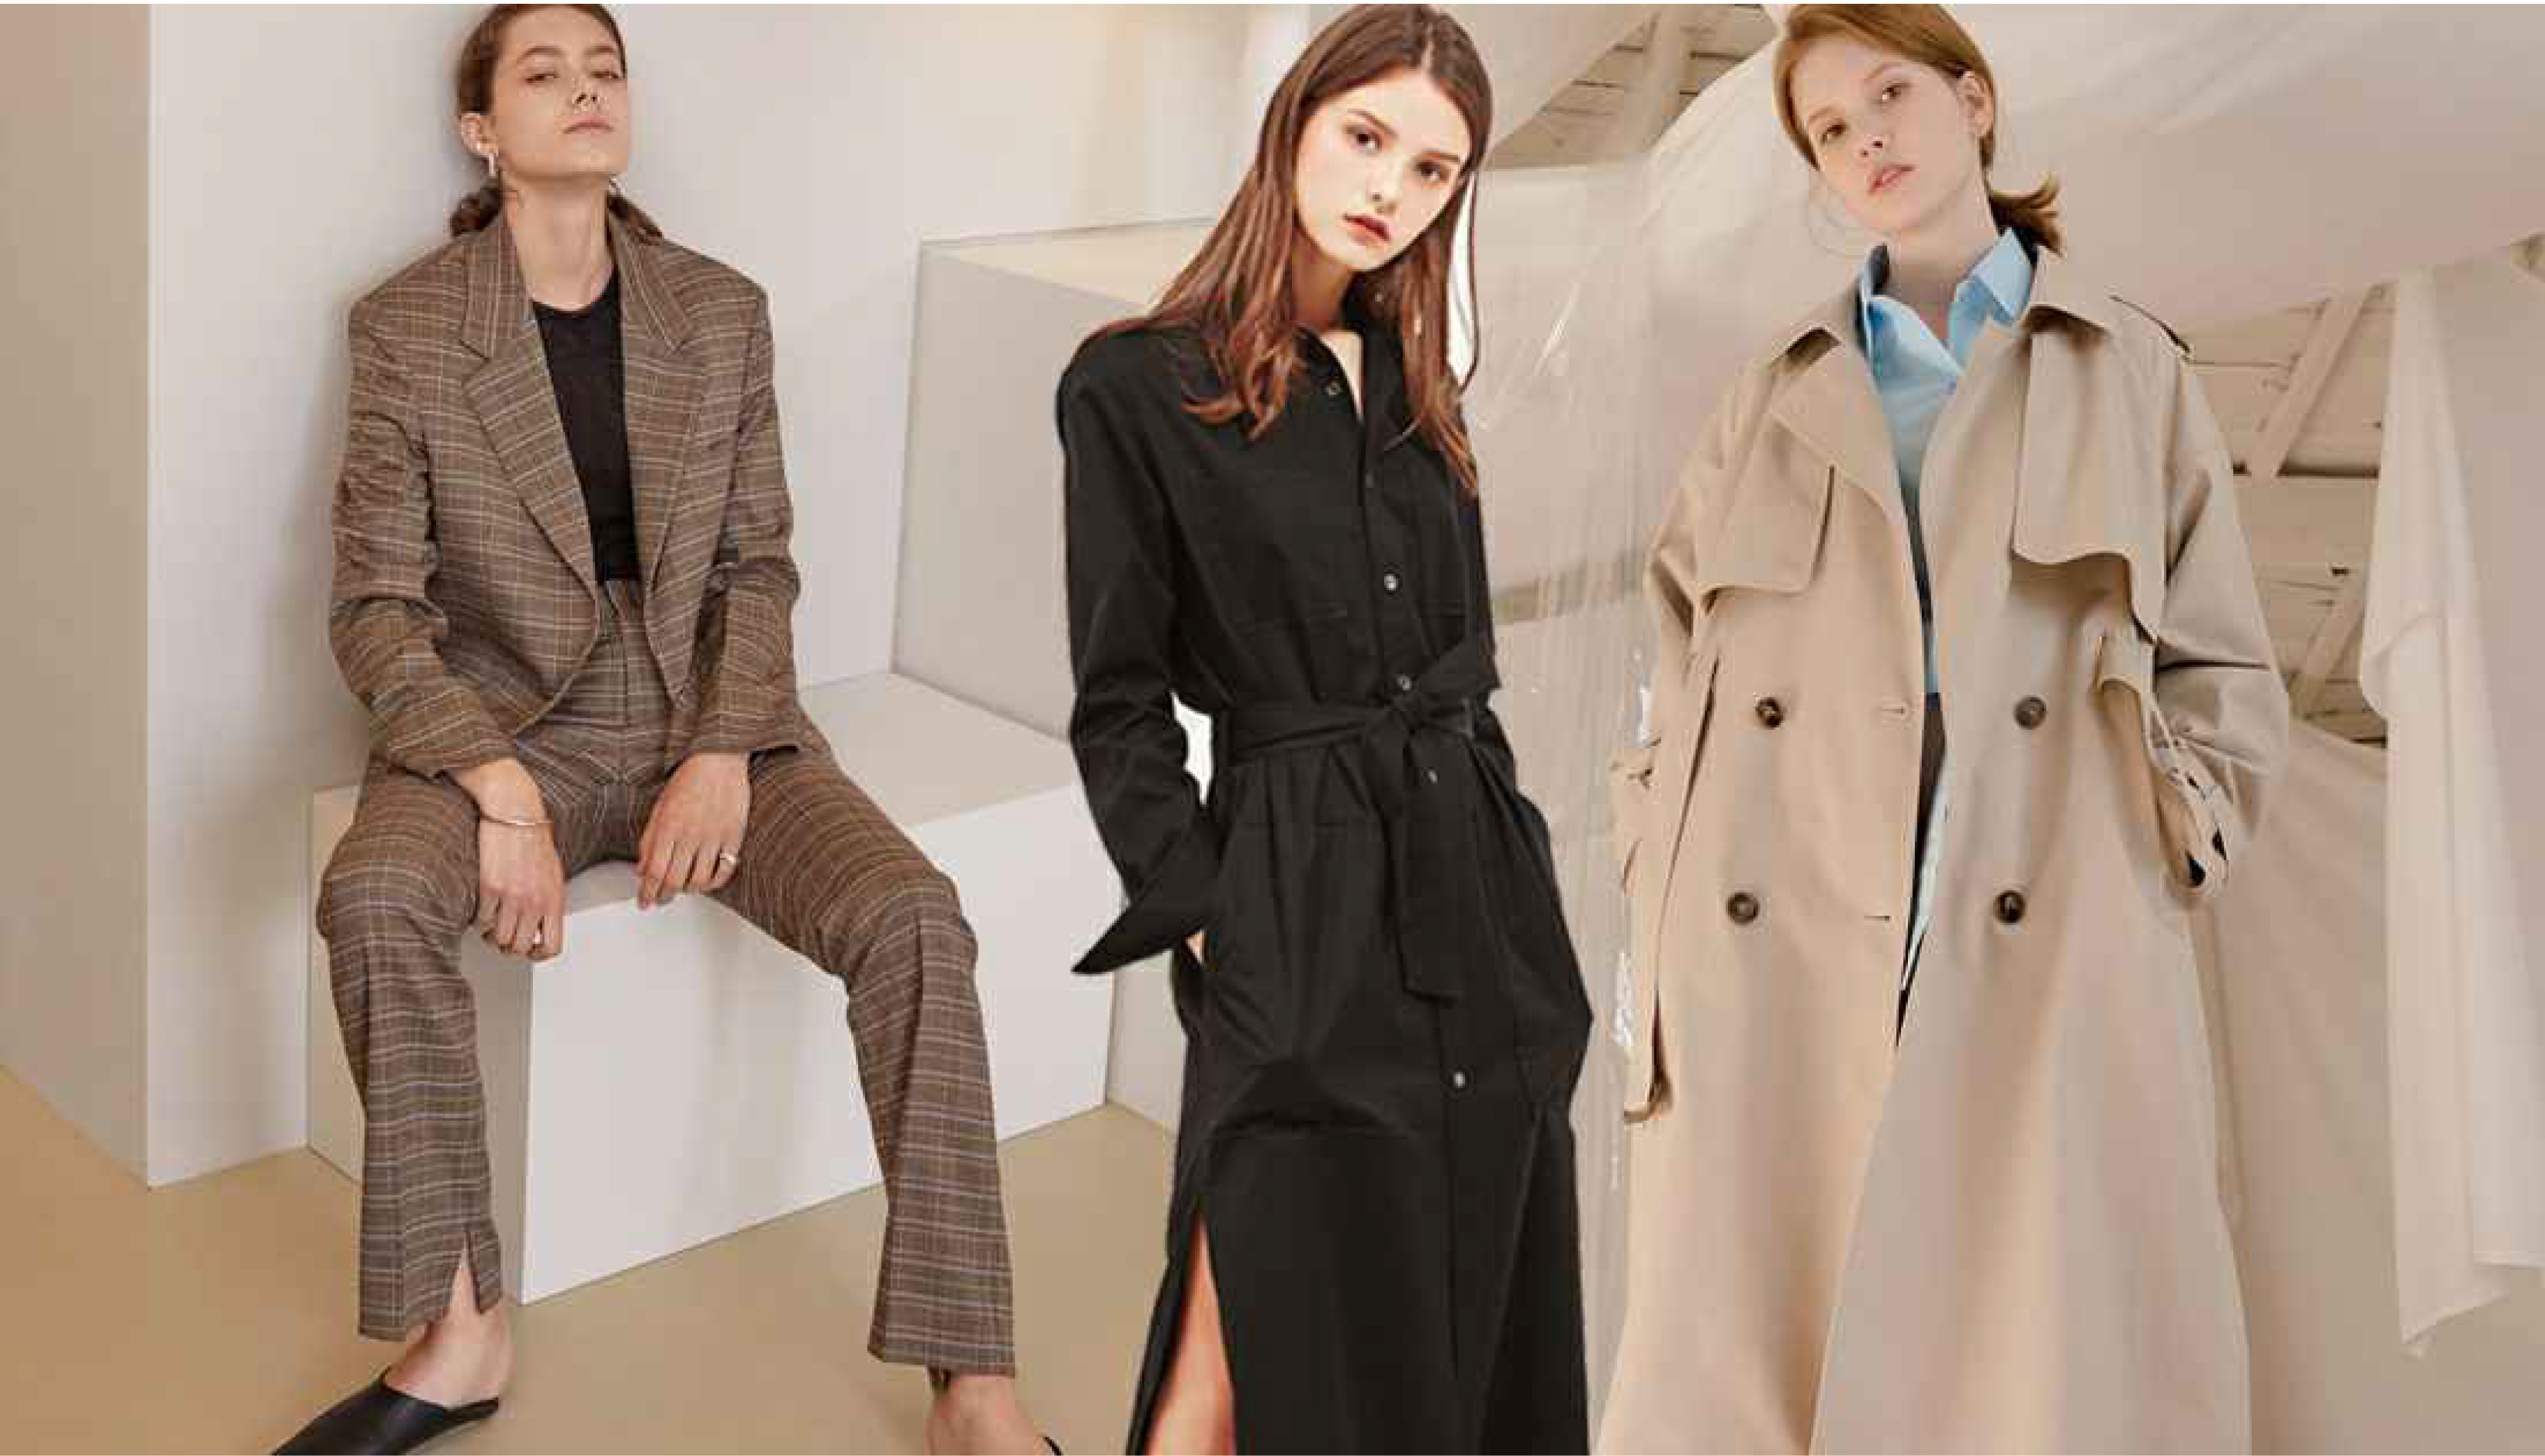 Clothes for Workplace -- 2019 S/S Womenswear of Designer Brands